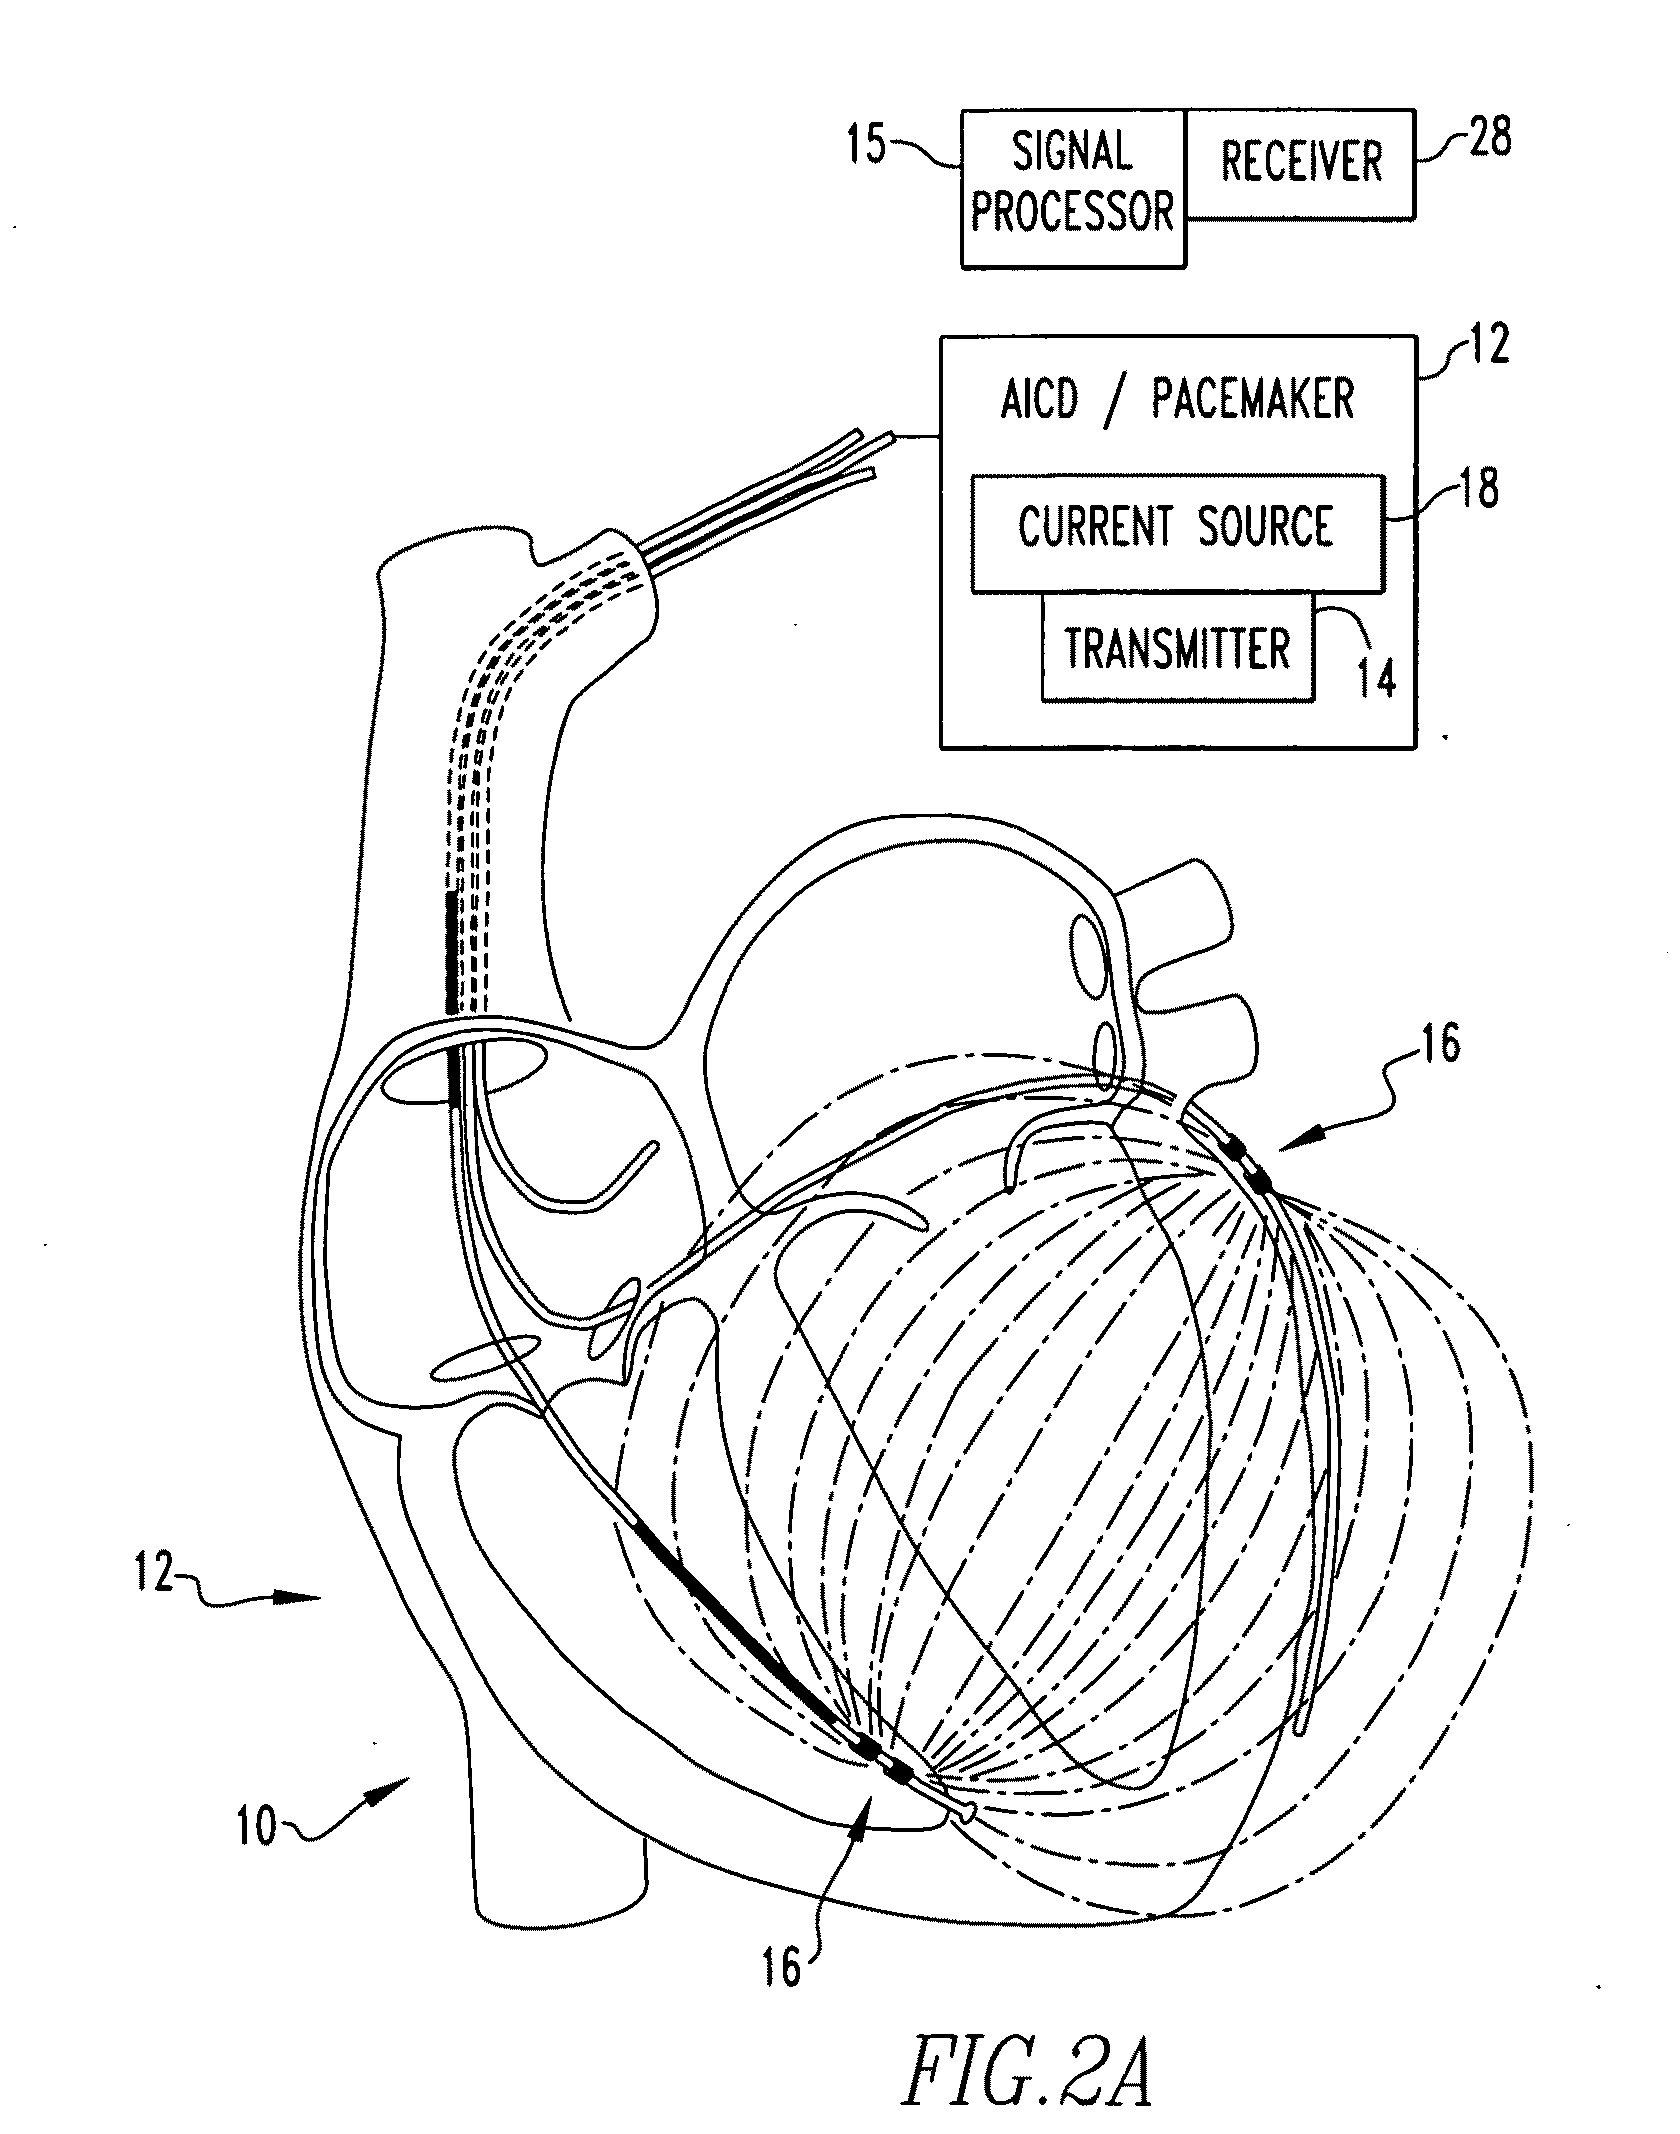 Method and apparatus for monitoring an organ of a patient